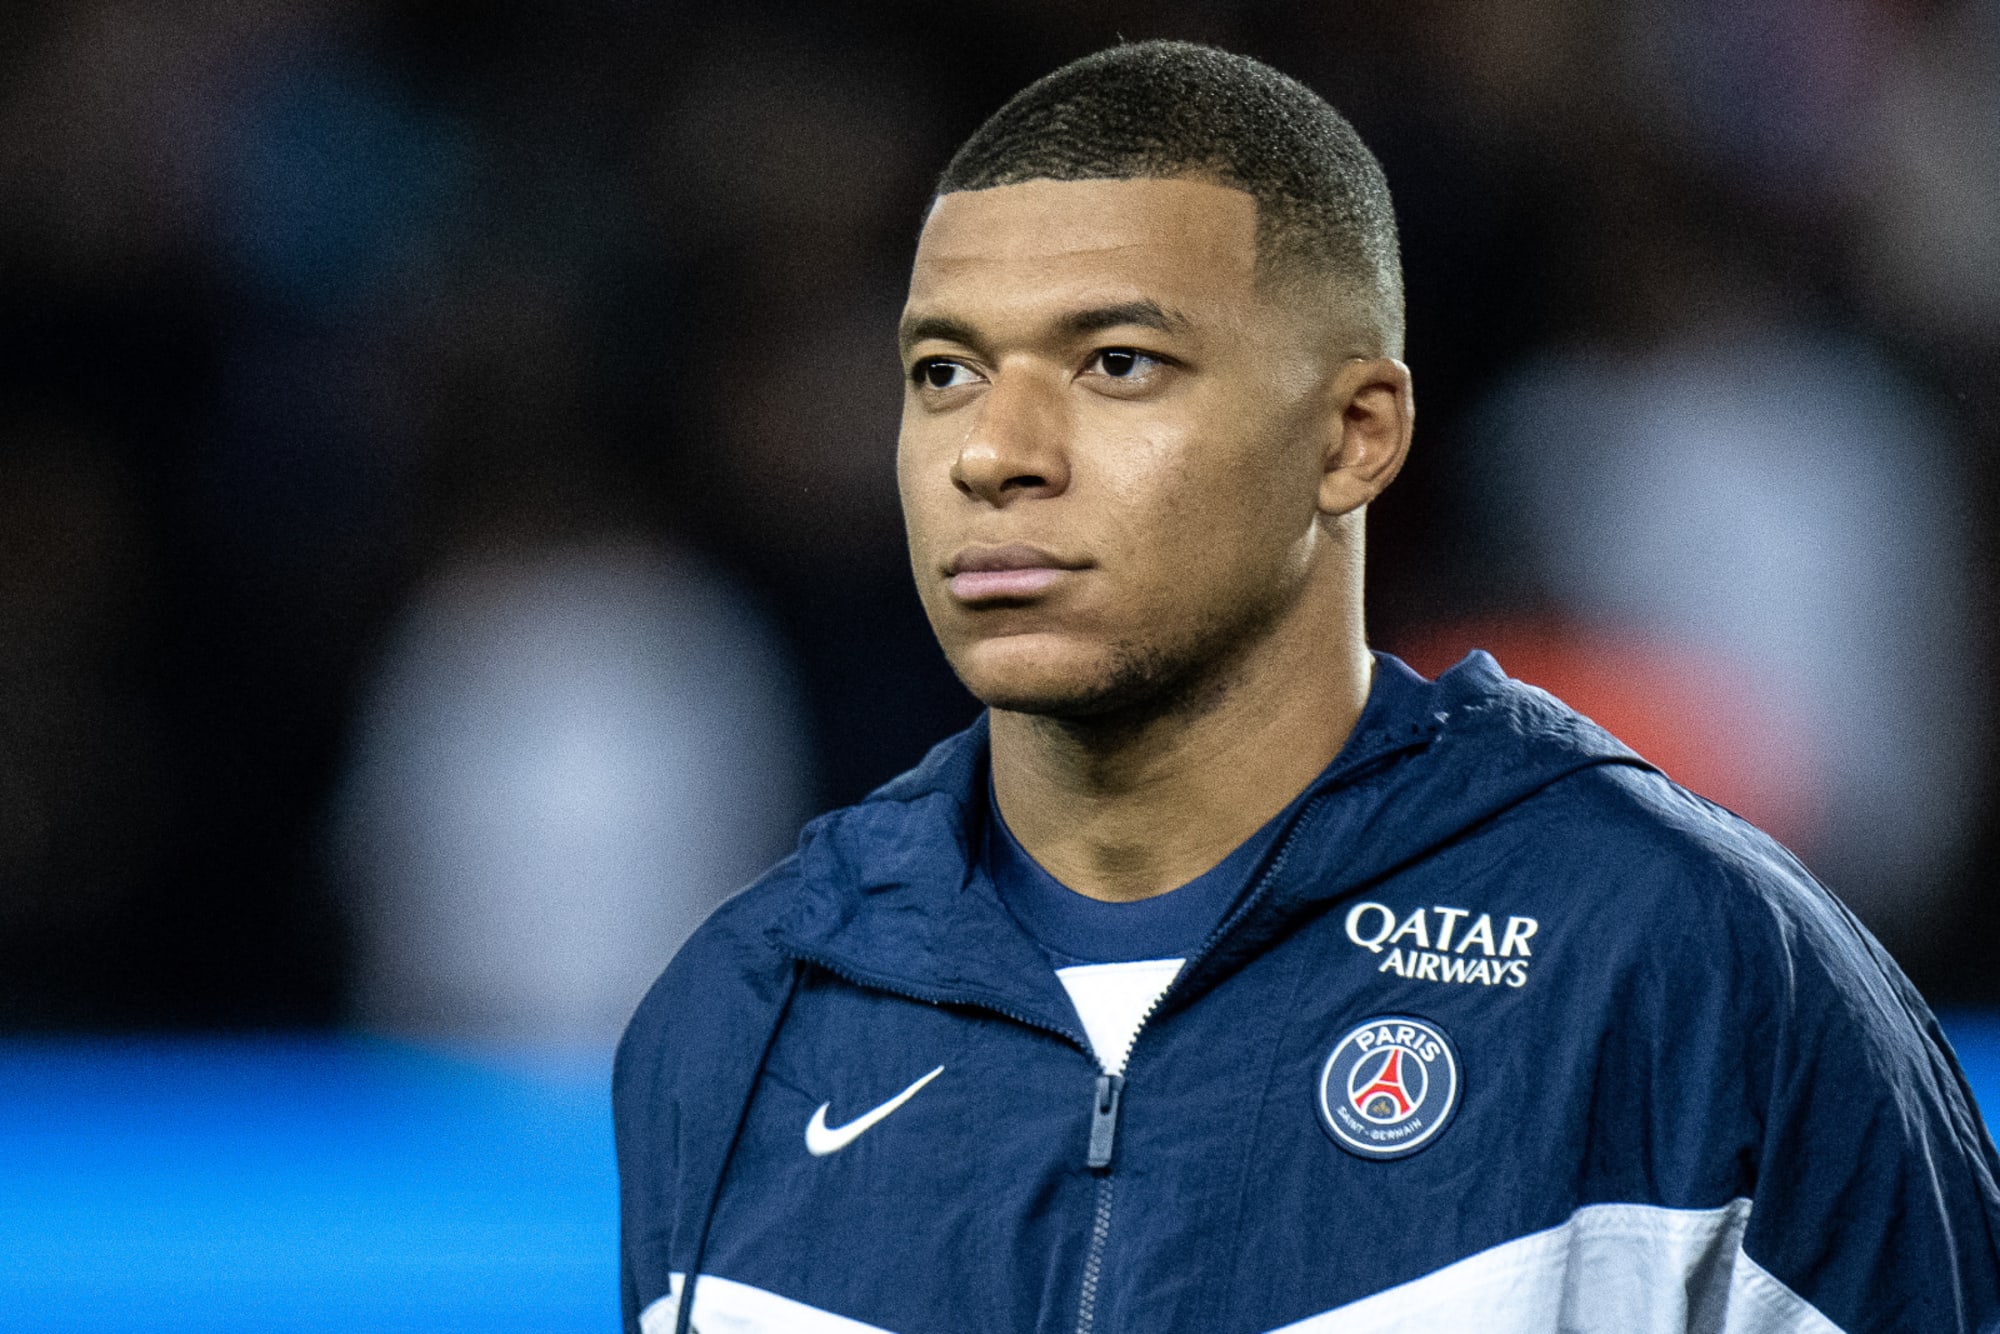 Mbappe's Cryptic Comments Spark Speculation About His Future at PSG